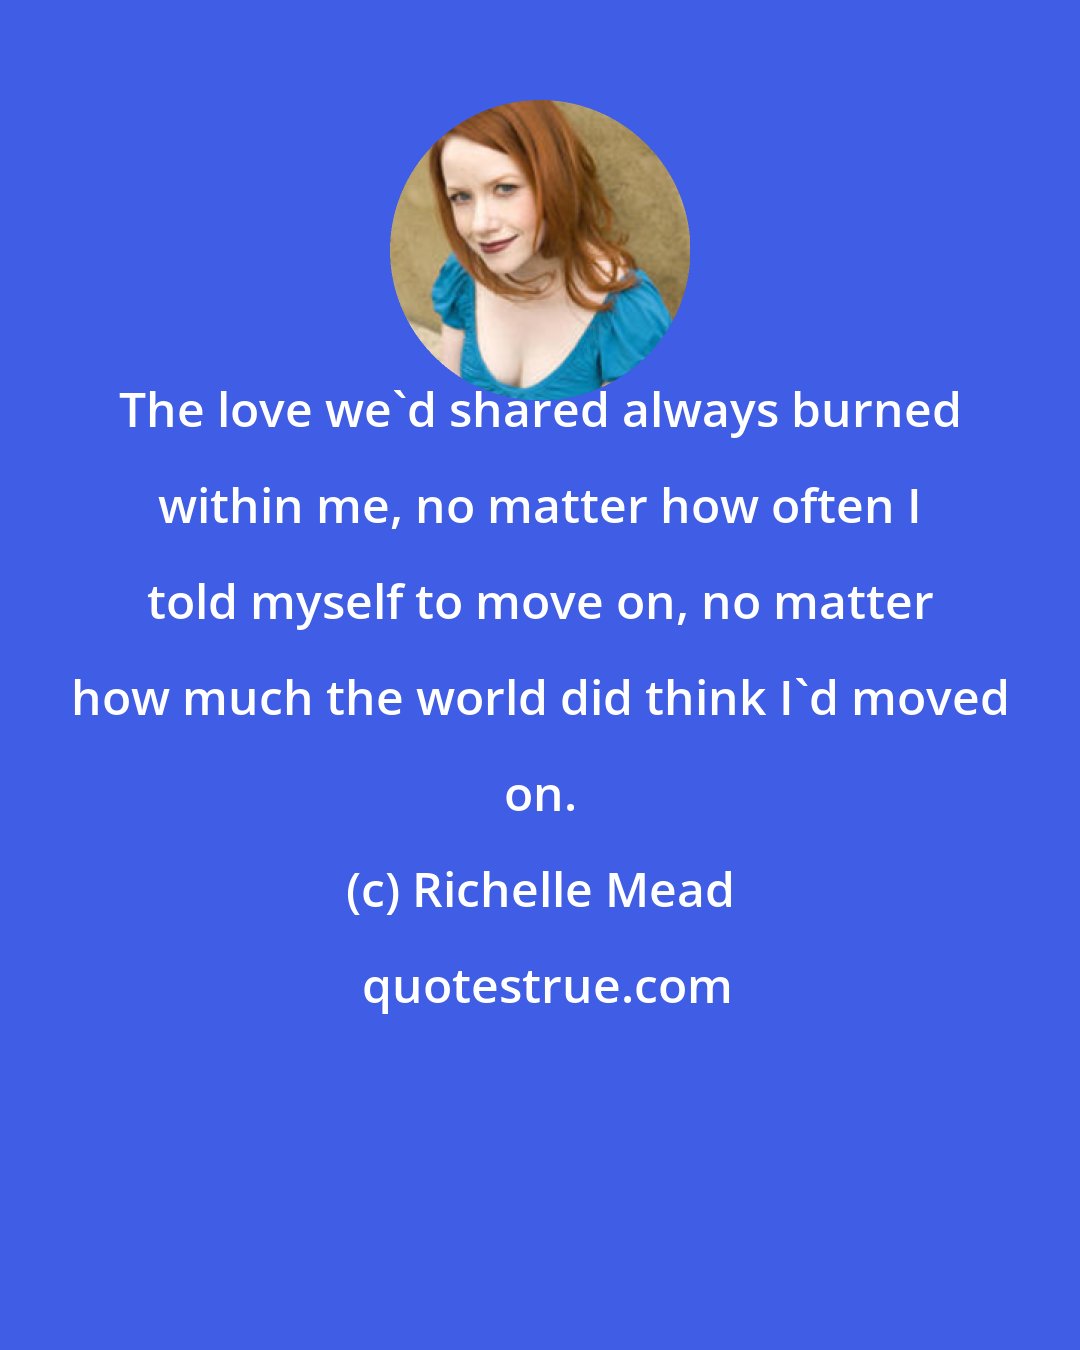 Richelle Mead: The love we'd shared always burned within me, no matter how often I told myself to move on, no matter how much the world did think I'd moved on.